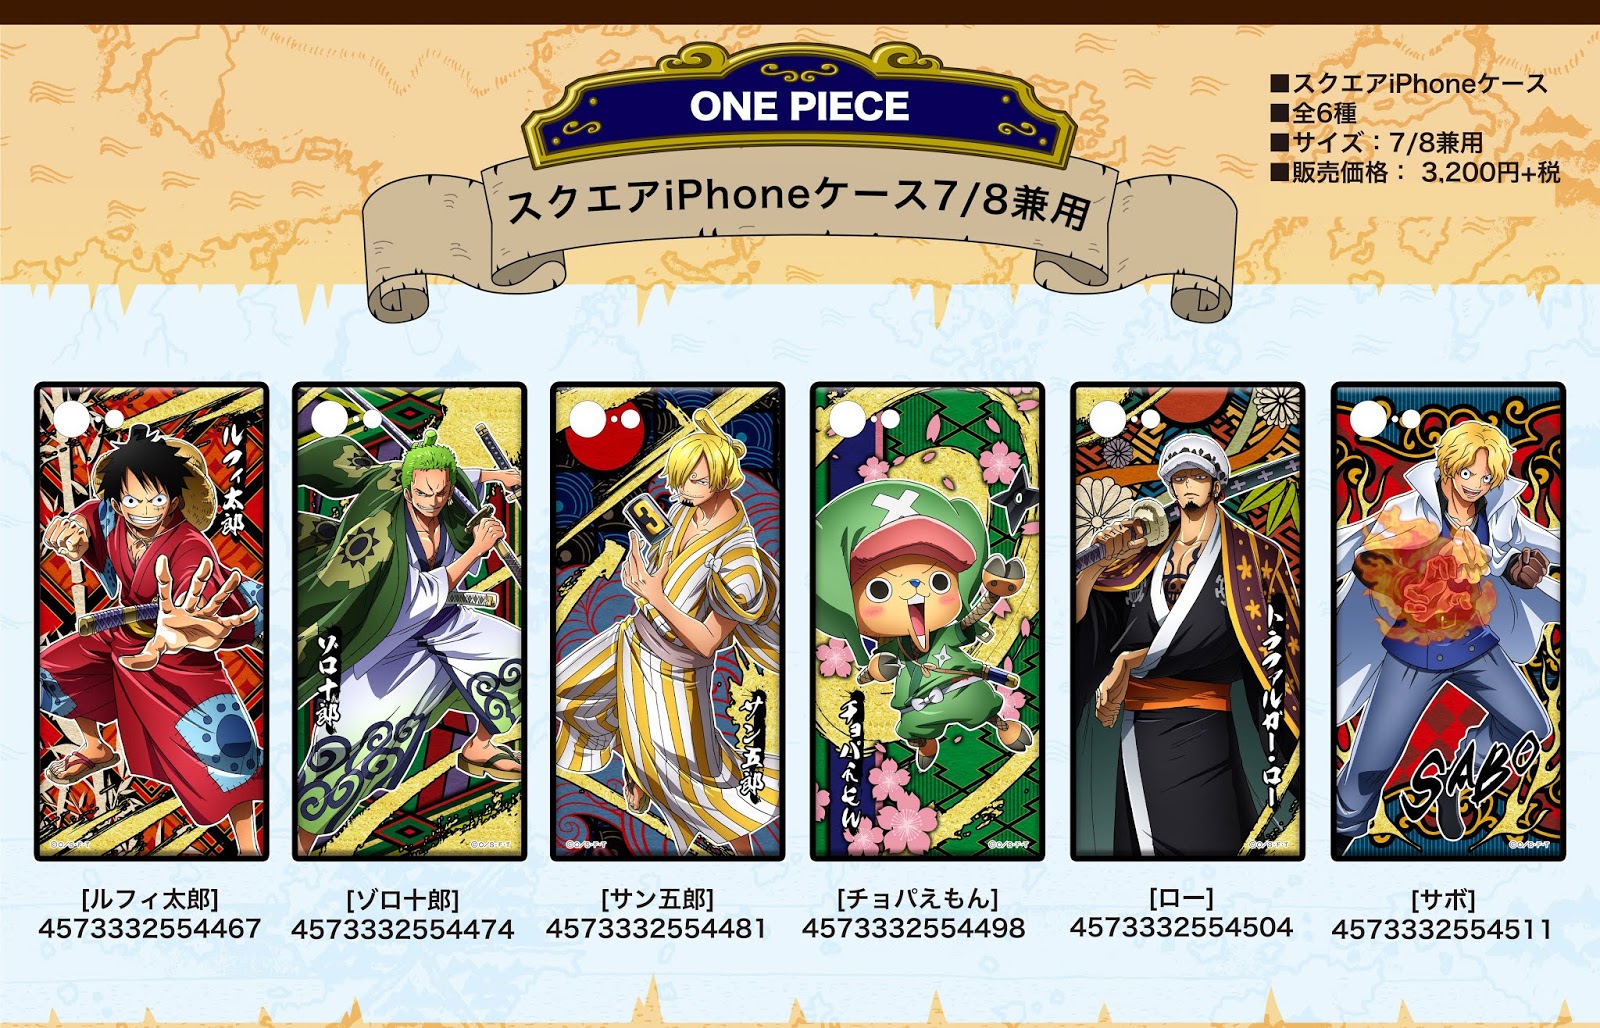 Rev 代購 預購 ワンピース スクエアiphoneケース7 8兼用 6種 One Piece Square Iphone Case 7 8